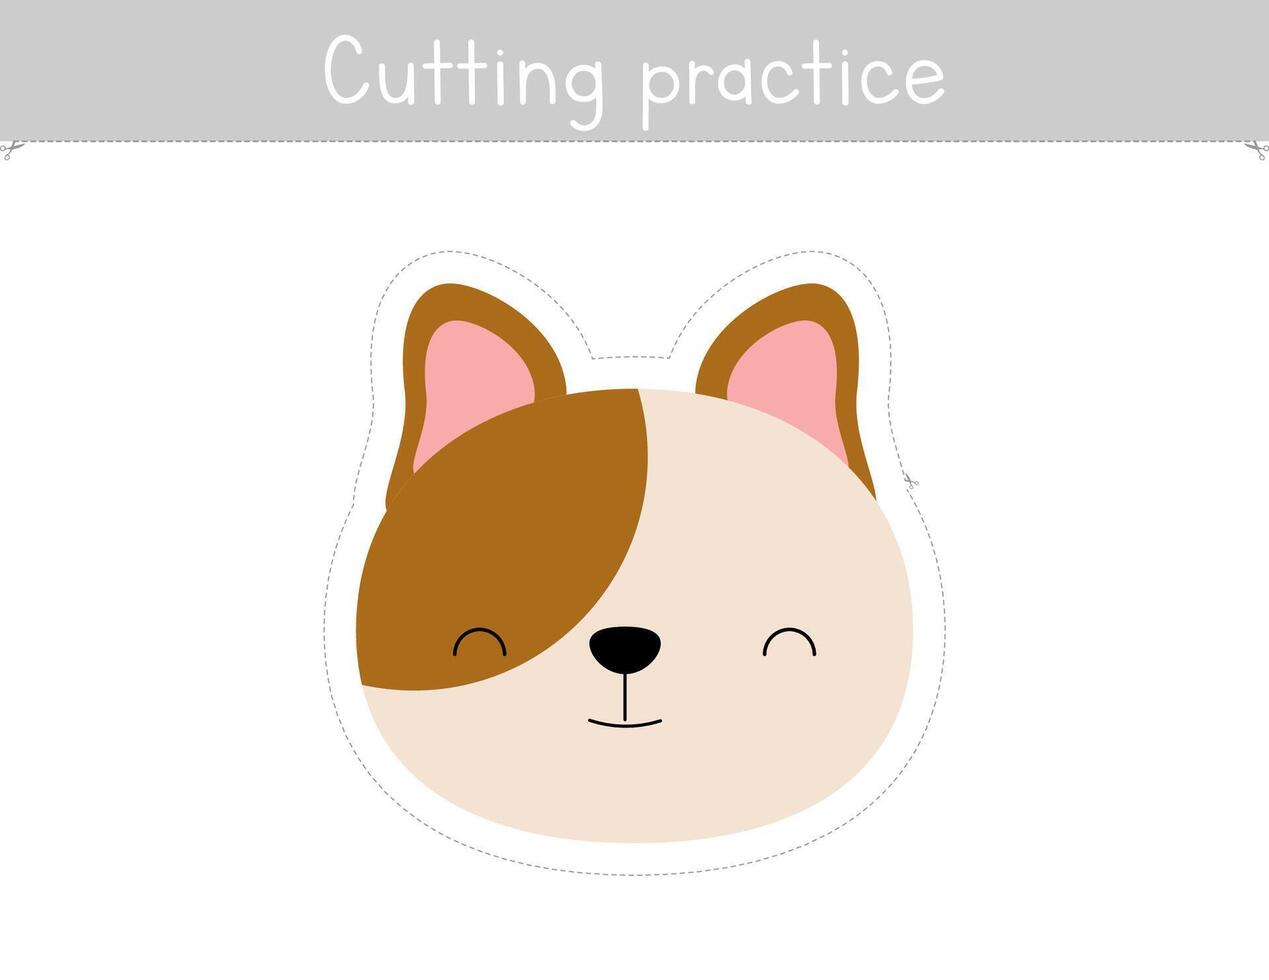 Cutting practice for kids worksheet. Educational game for children. Scissor skills activity for school and homeschool. Cute dog vector